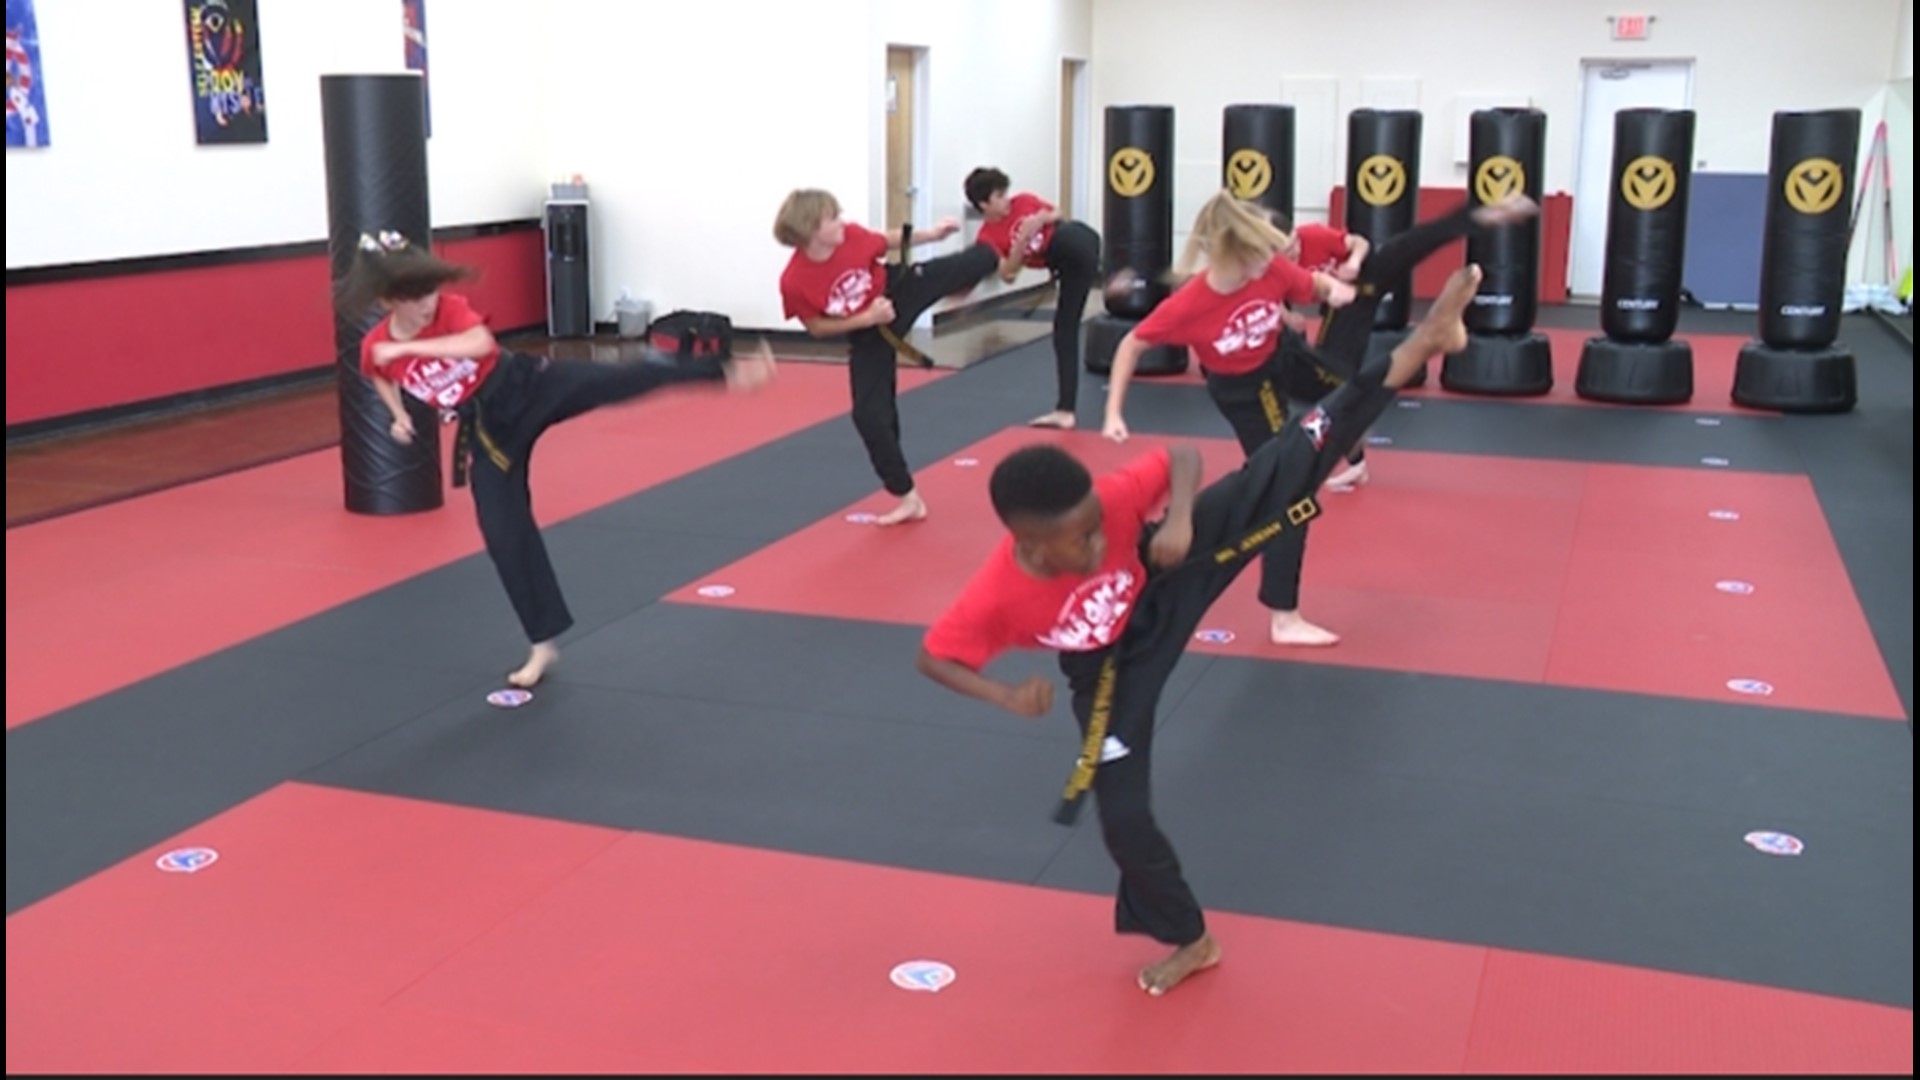 The Taekwondo black belts are all under 15 years old, trained right here at Victory Martial Arts.